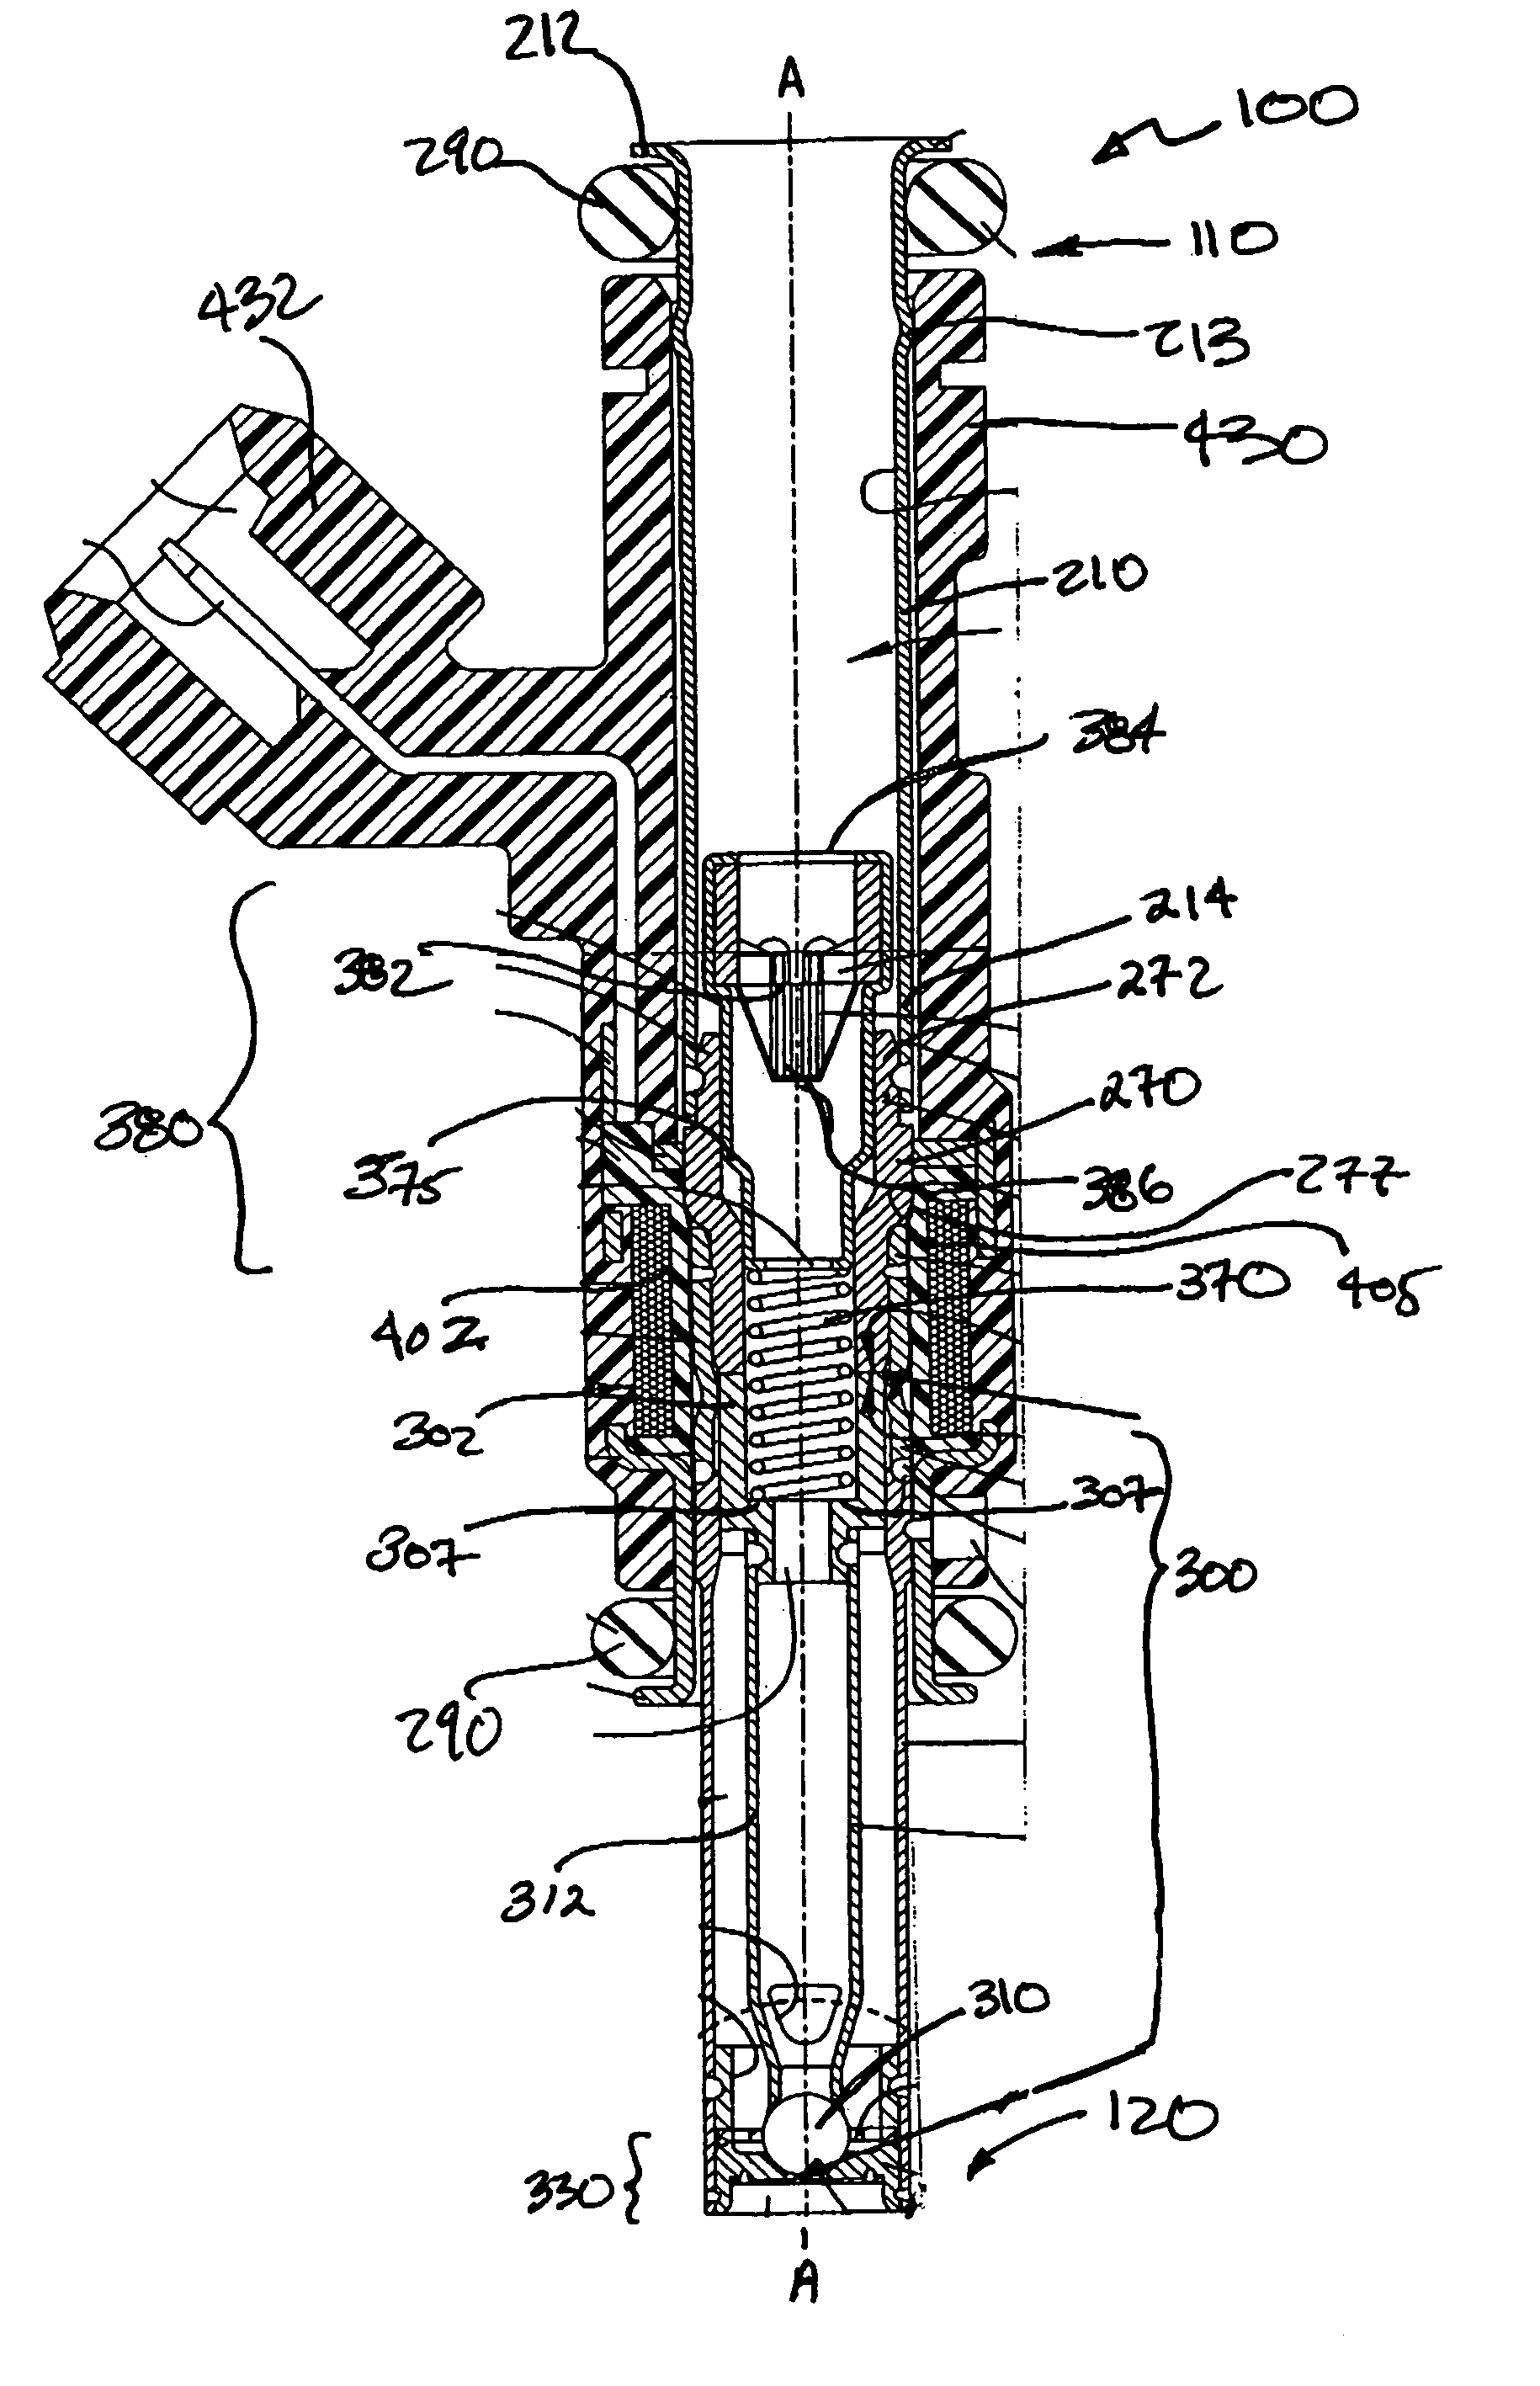 Deep pocket seat assembly in modular fuel injector with fuel filter mounted to spring bias adjusting tube and methods